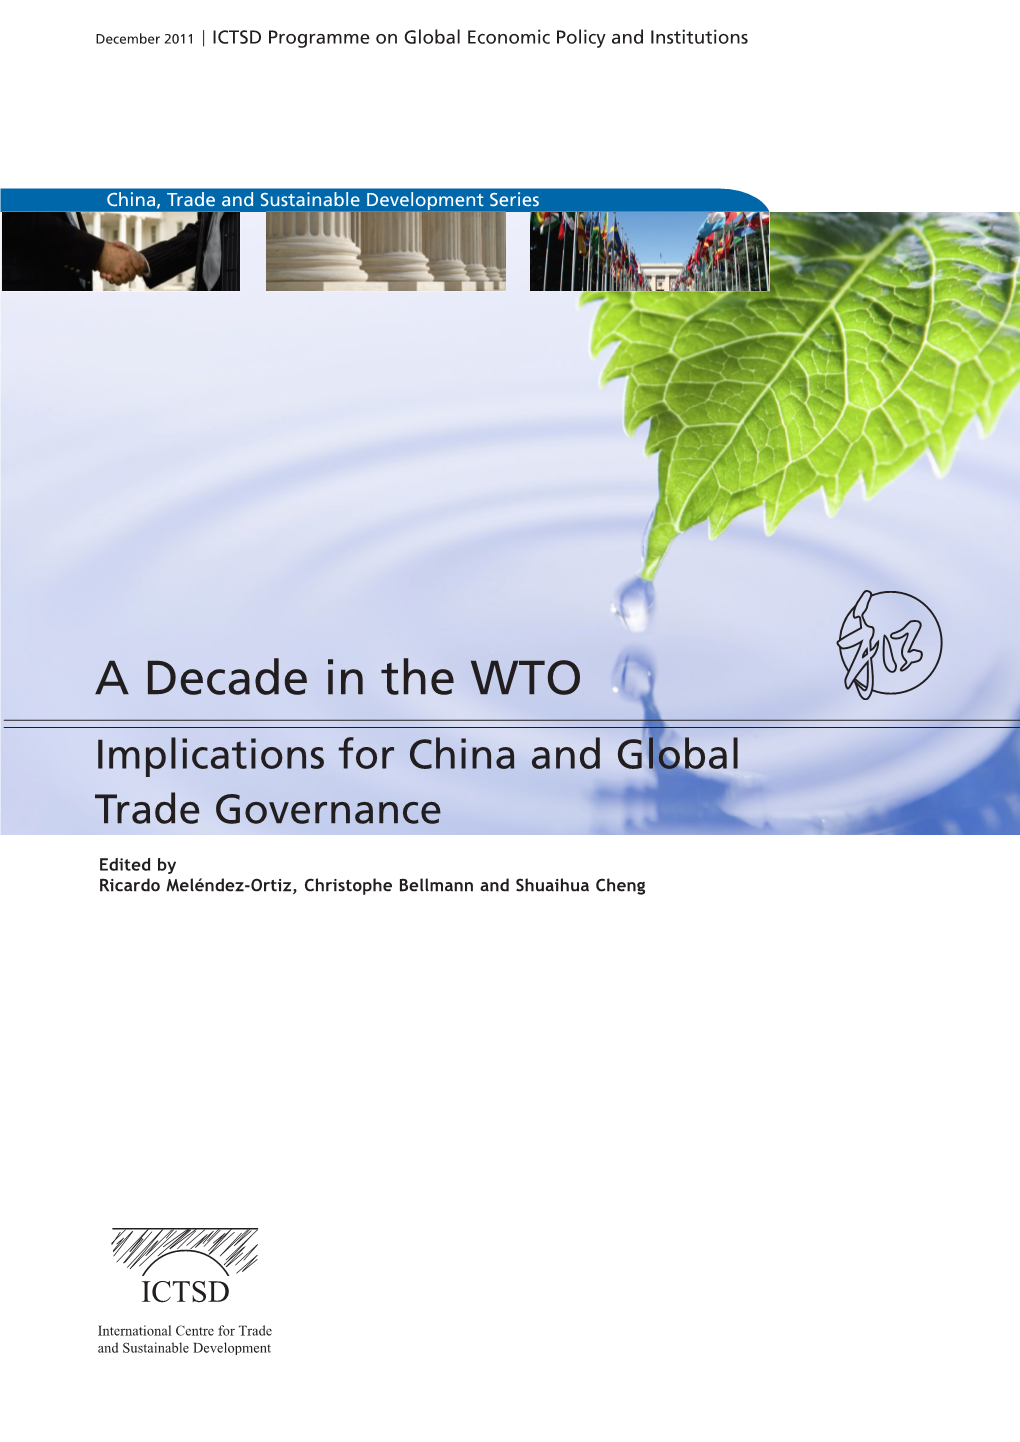 A Decade in the WTO: Implications for China and Global Trade Governance